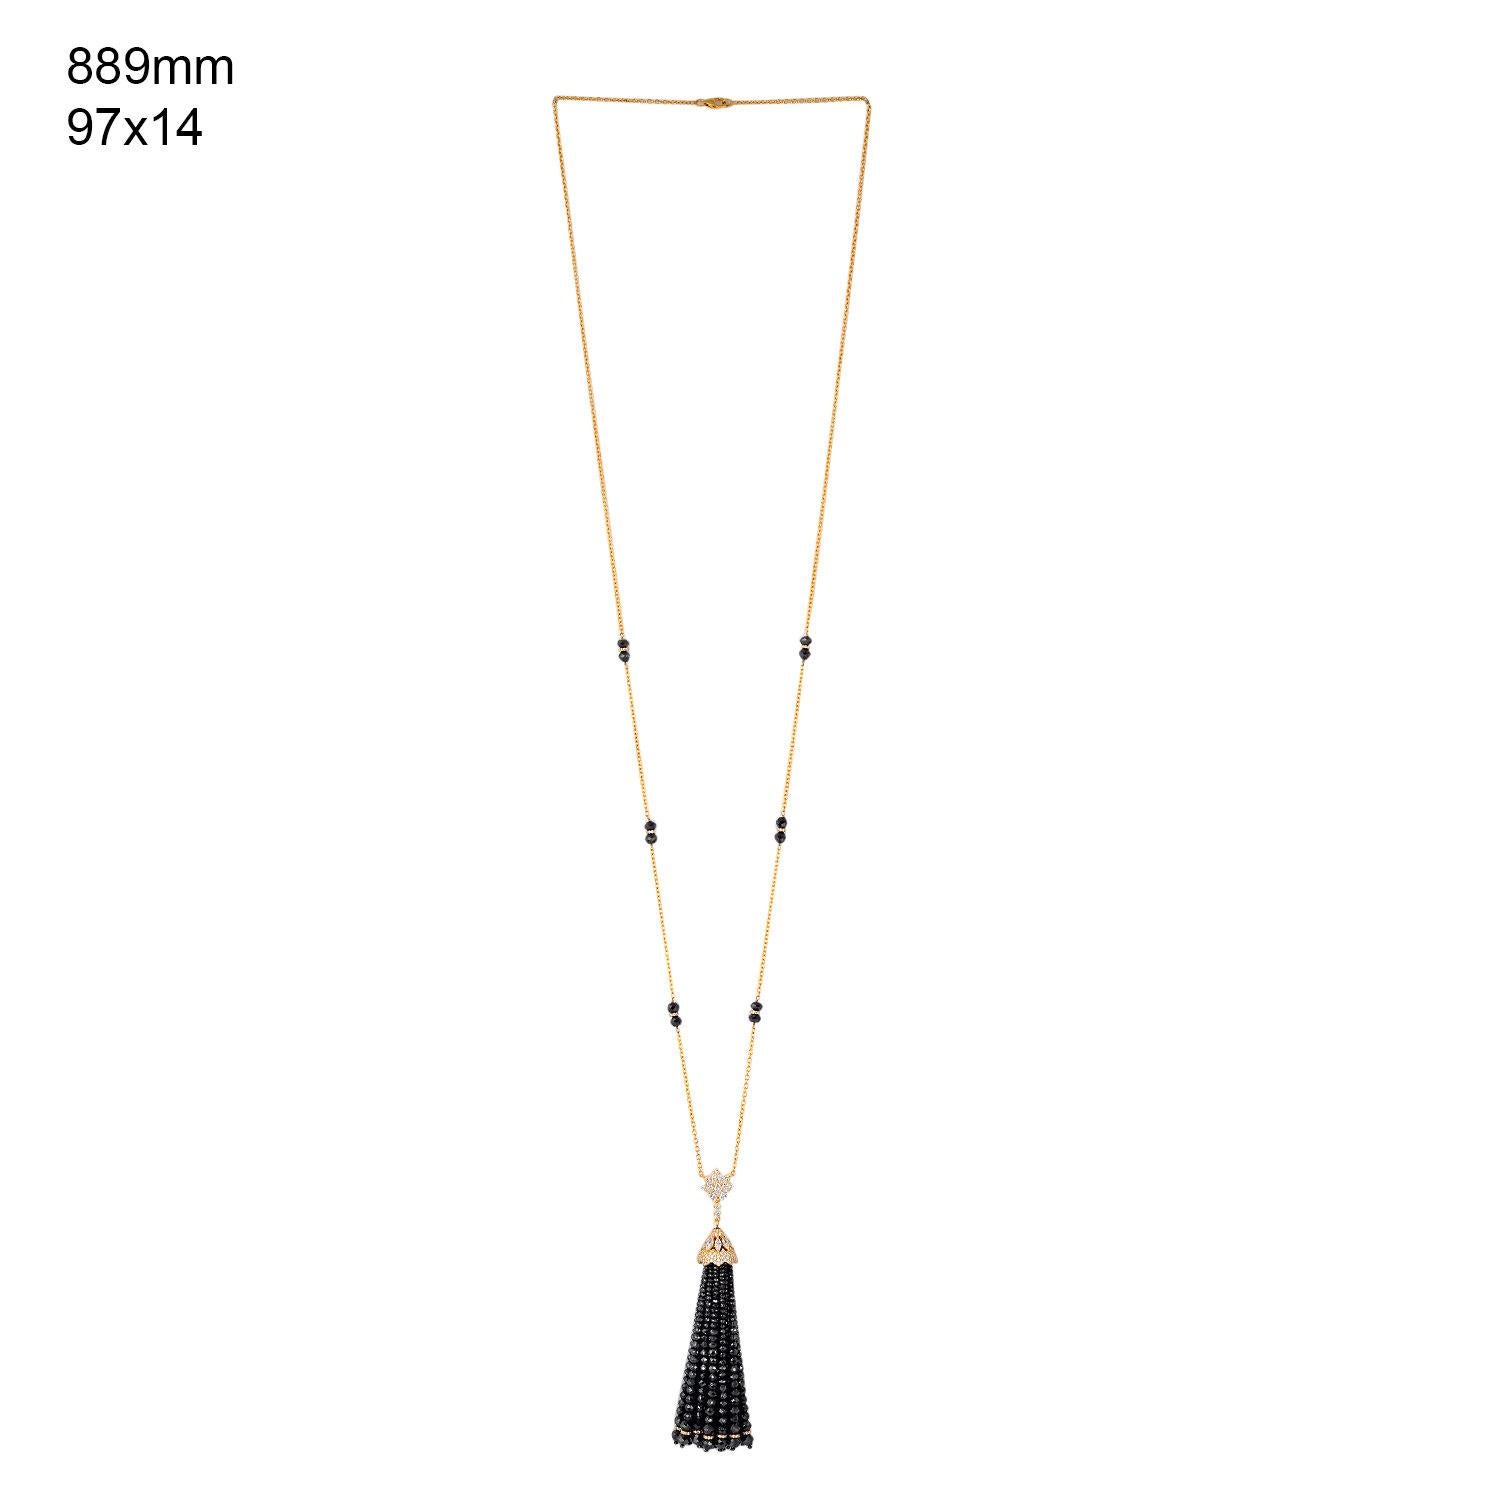 A stunning tassel necklace is handmade in 18K gold and set in 95.42 carats of glimmering diamonds. 

FOLLOW  MEGHNA JEWELS storefront to view the latest collection & exclusive pieces.  Meghna Jewels is proudly rated as a Top Seller on 1stdibs with 5